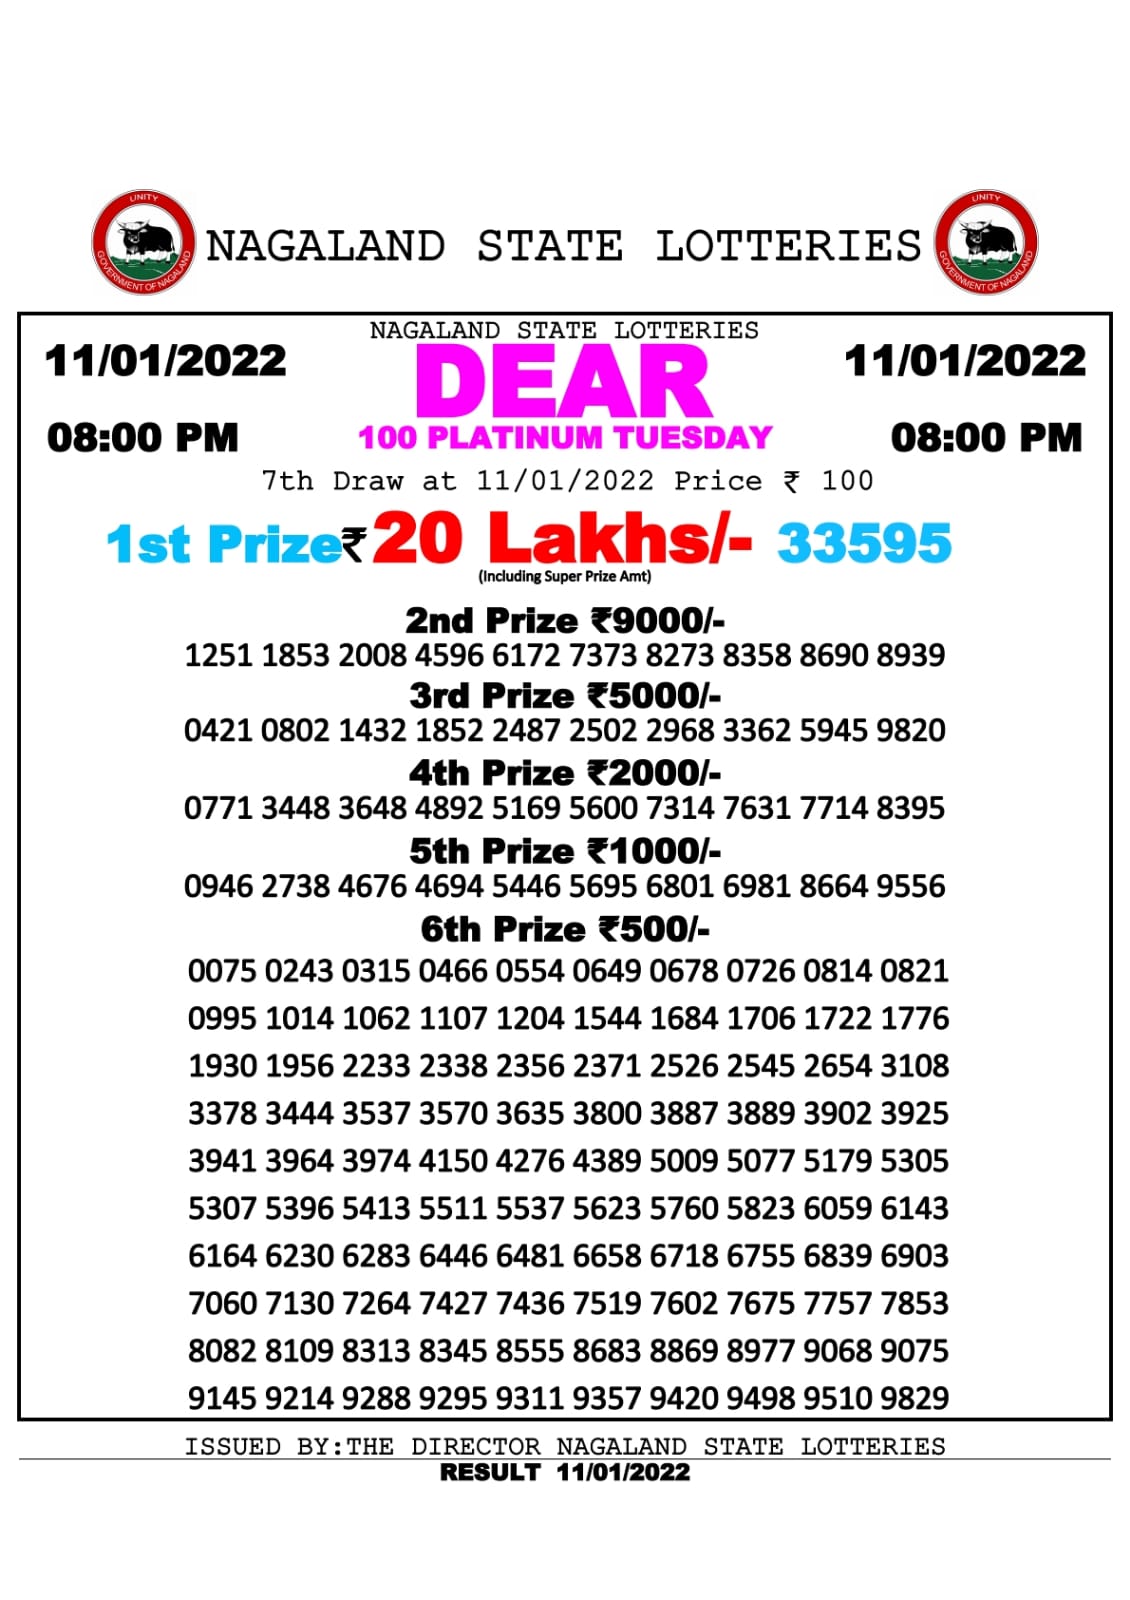 NAGALLAND STATE DEAR 100 WEEKLY LOTTERY 8 pm 11-01-2022